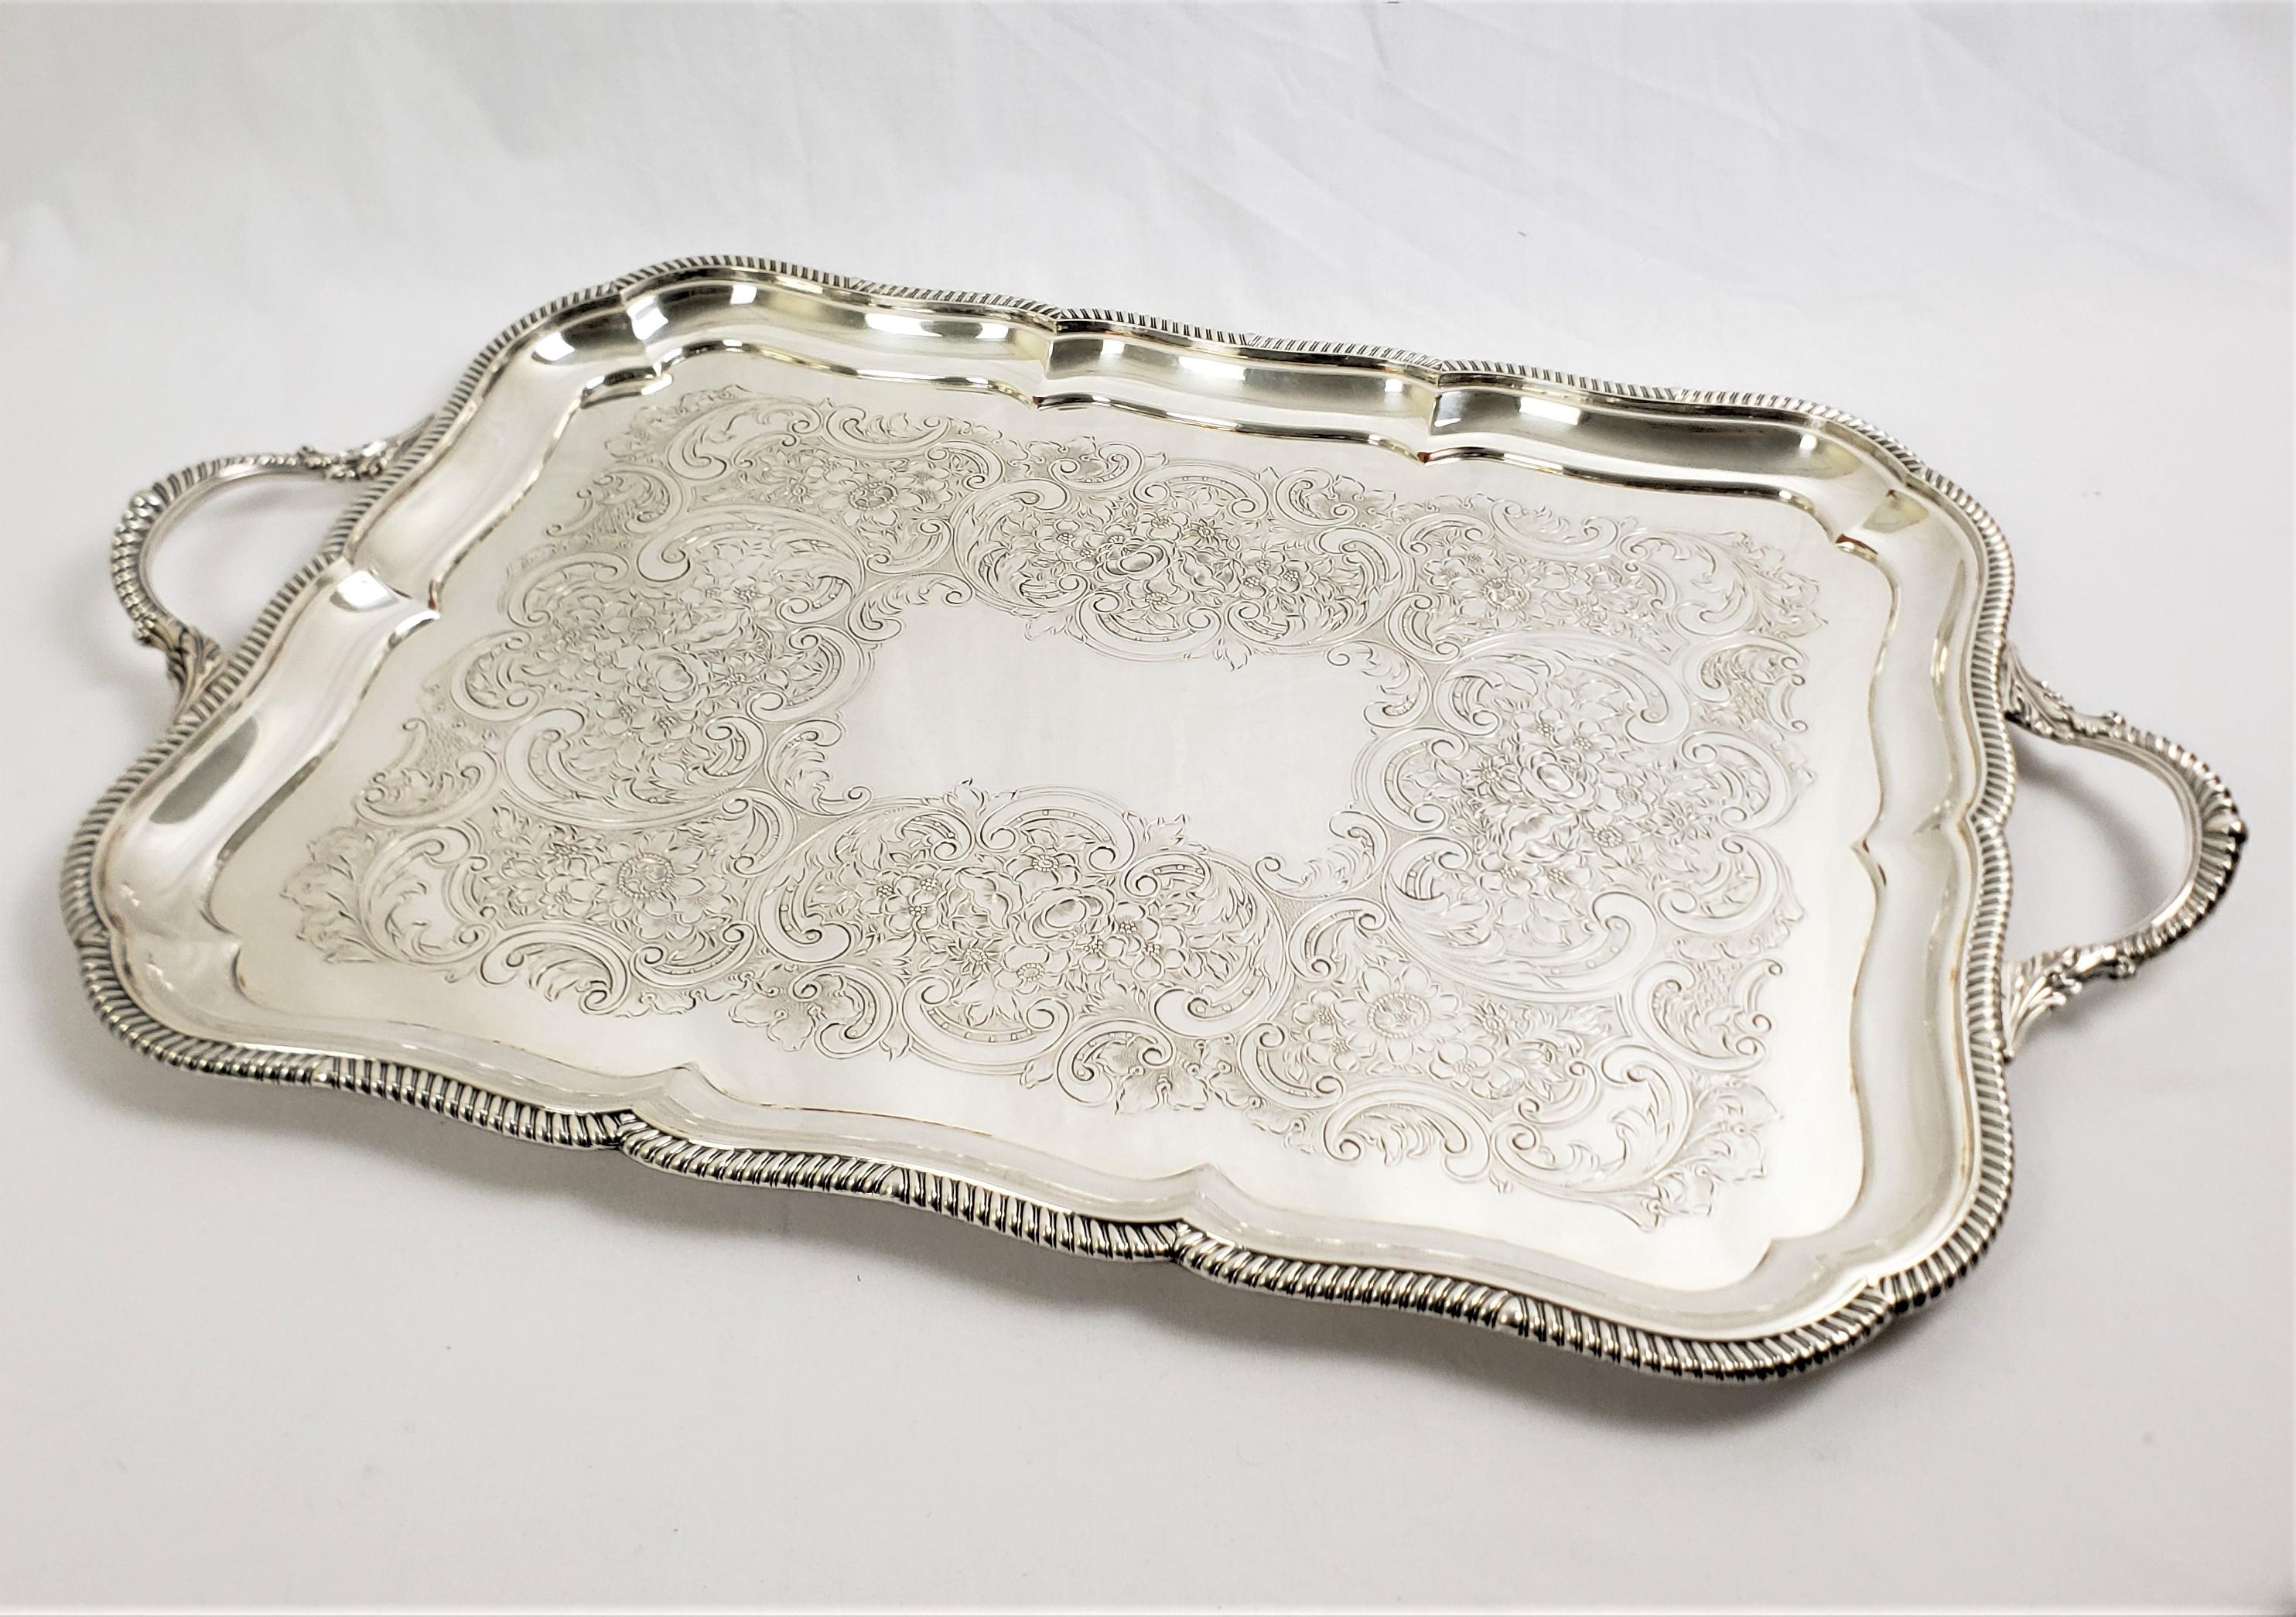 Antique Barker Ellis Silver Plated Serving Tray with Stylized Rope Decoration For Sale 4